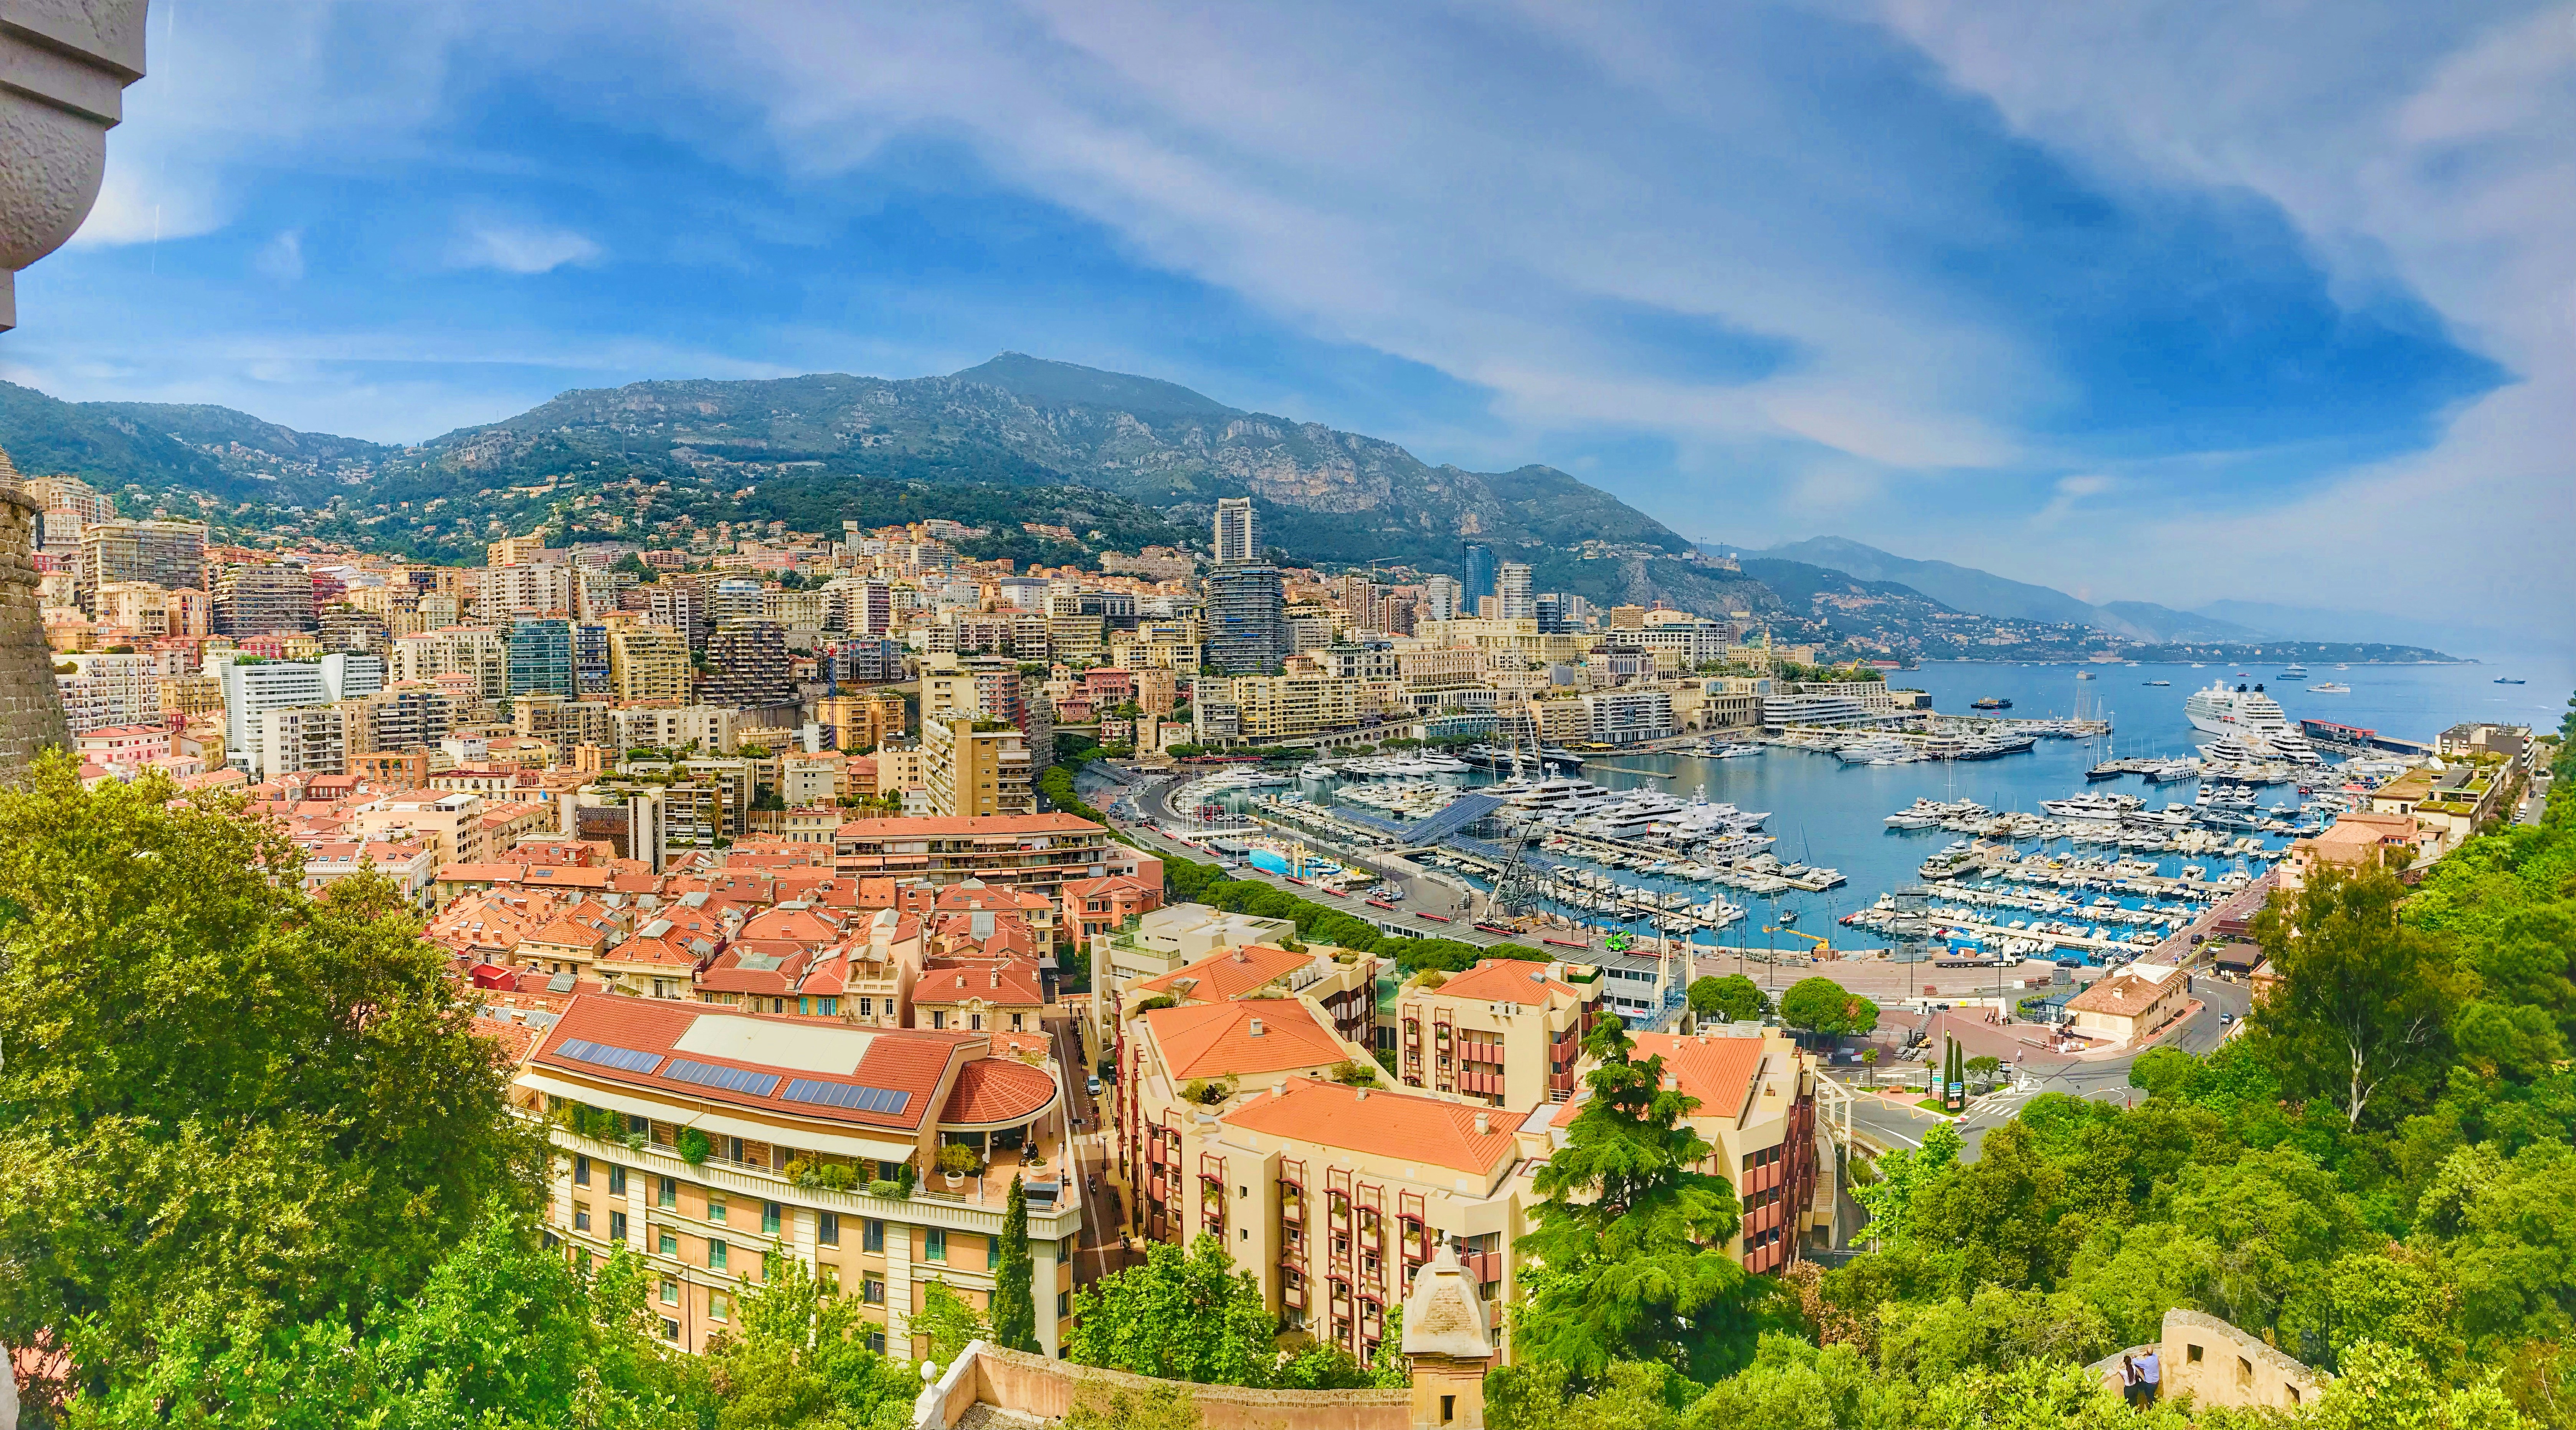 A panorama view of Monaco